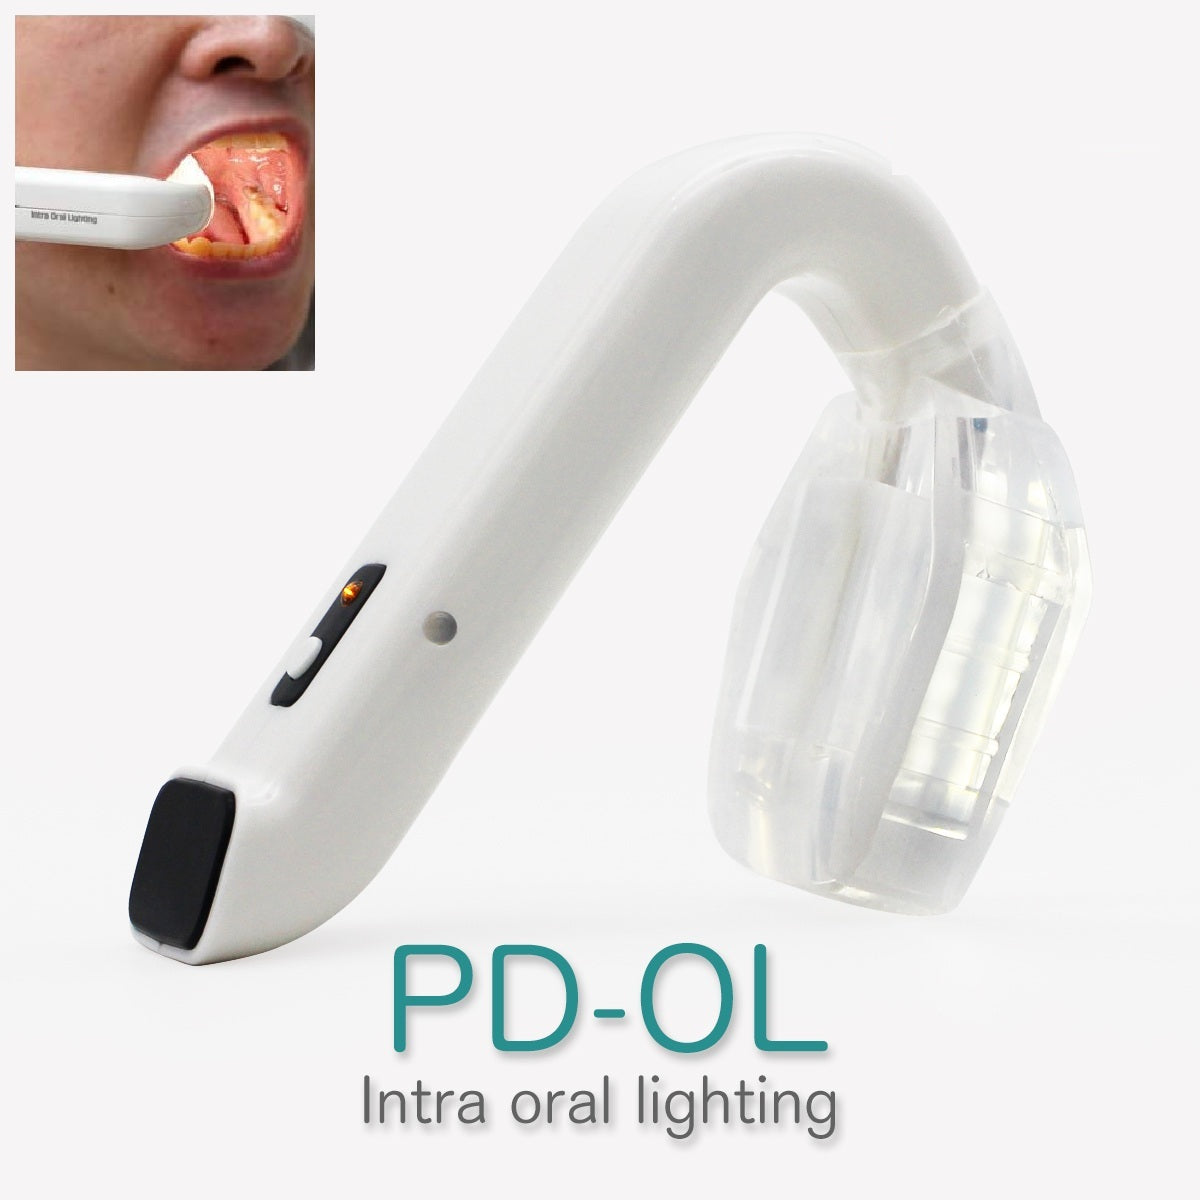 PD-OL Dentist Wireless Rechargeable Intro Oral LED Lighting Easy Bite Block Light Lamp Suction Tip